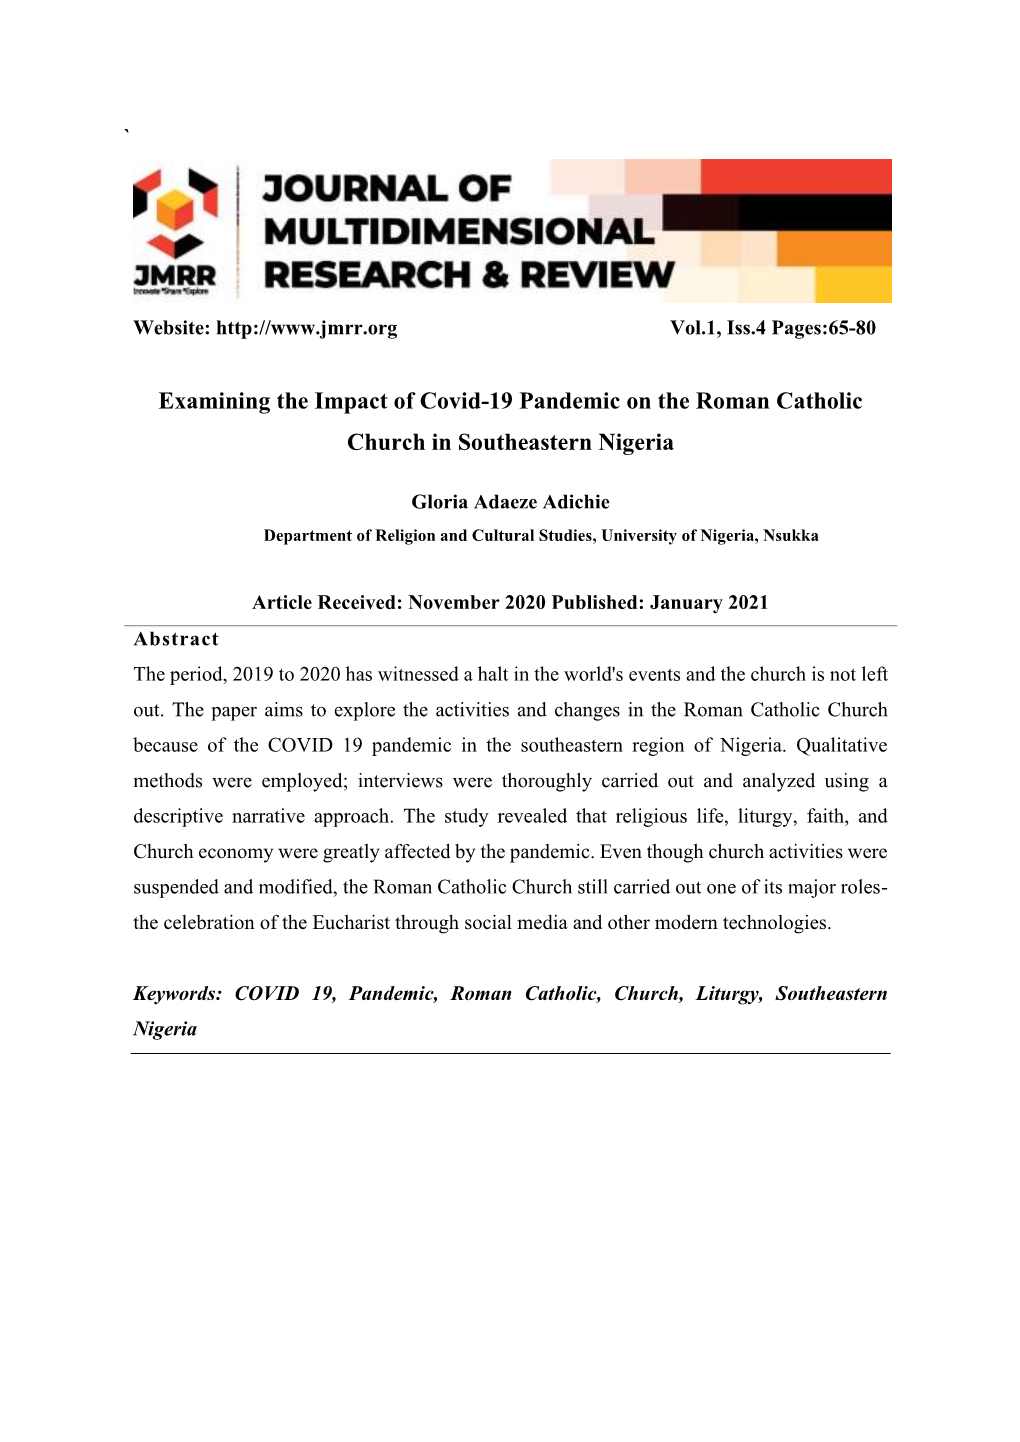 Examining the Impact of Covid-19 Pandemic on the Roman Catholic Church in Southeastern Nigeria